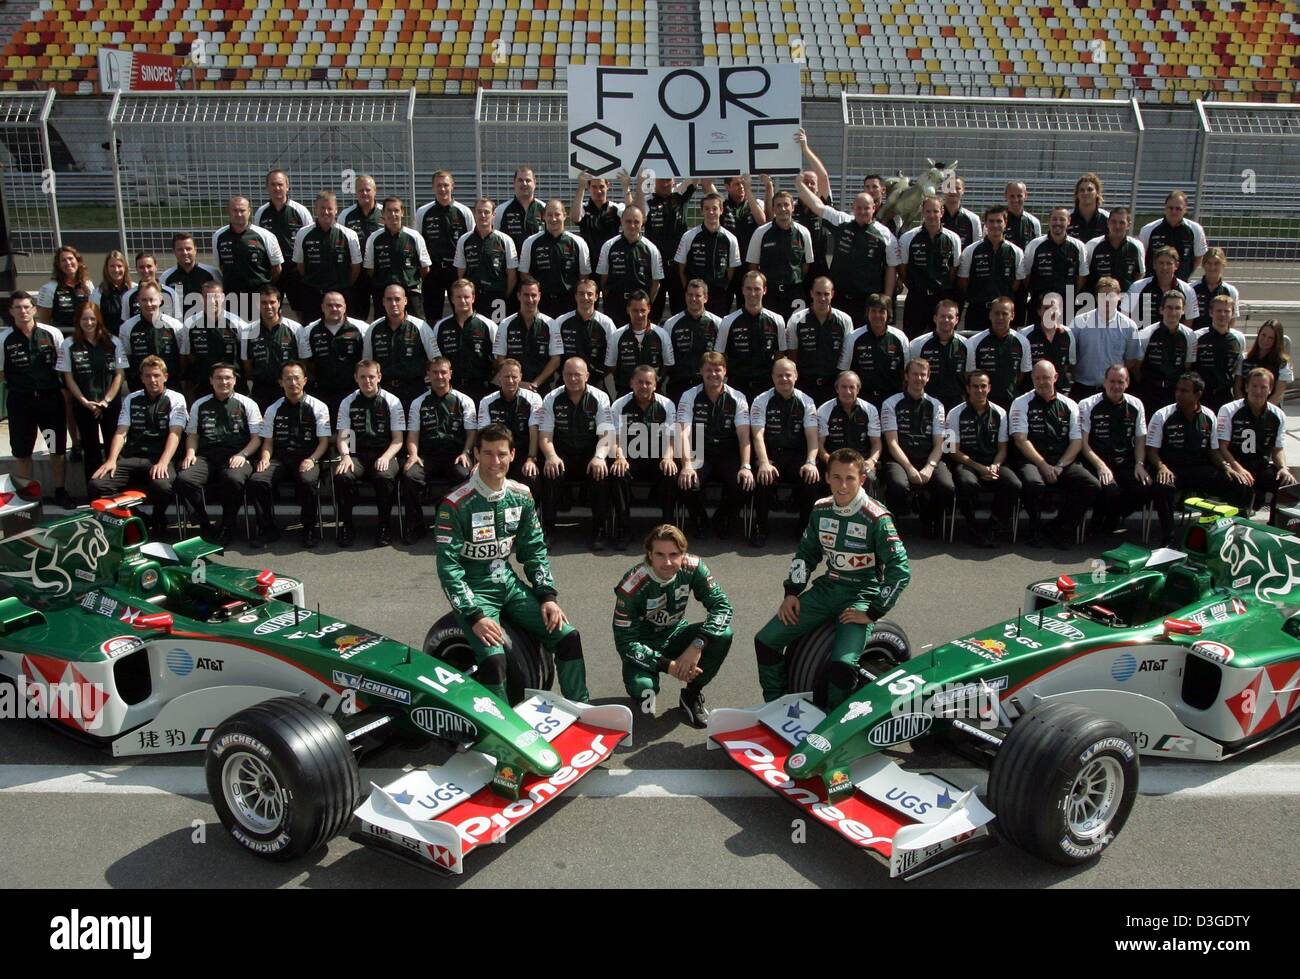 (dpa) - The Jaguar team with their formula one drivers Mark Webber, Bjoern Windheim and Christian Klien (L-R, front) pose with a 'For Sale' sign at the new formula one racing circuit in Shanghai, China, Thursday, 23 September 2004. Jaguar is to withdraw from Formula One racing from next season, the manufacturer's parent company Ford announced on Friday, 17 September. The announceme Stock Photo